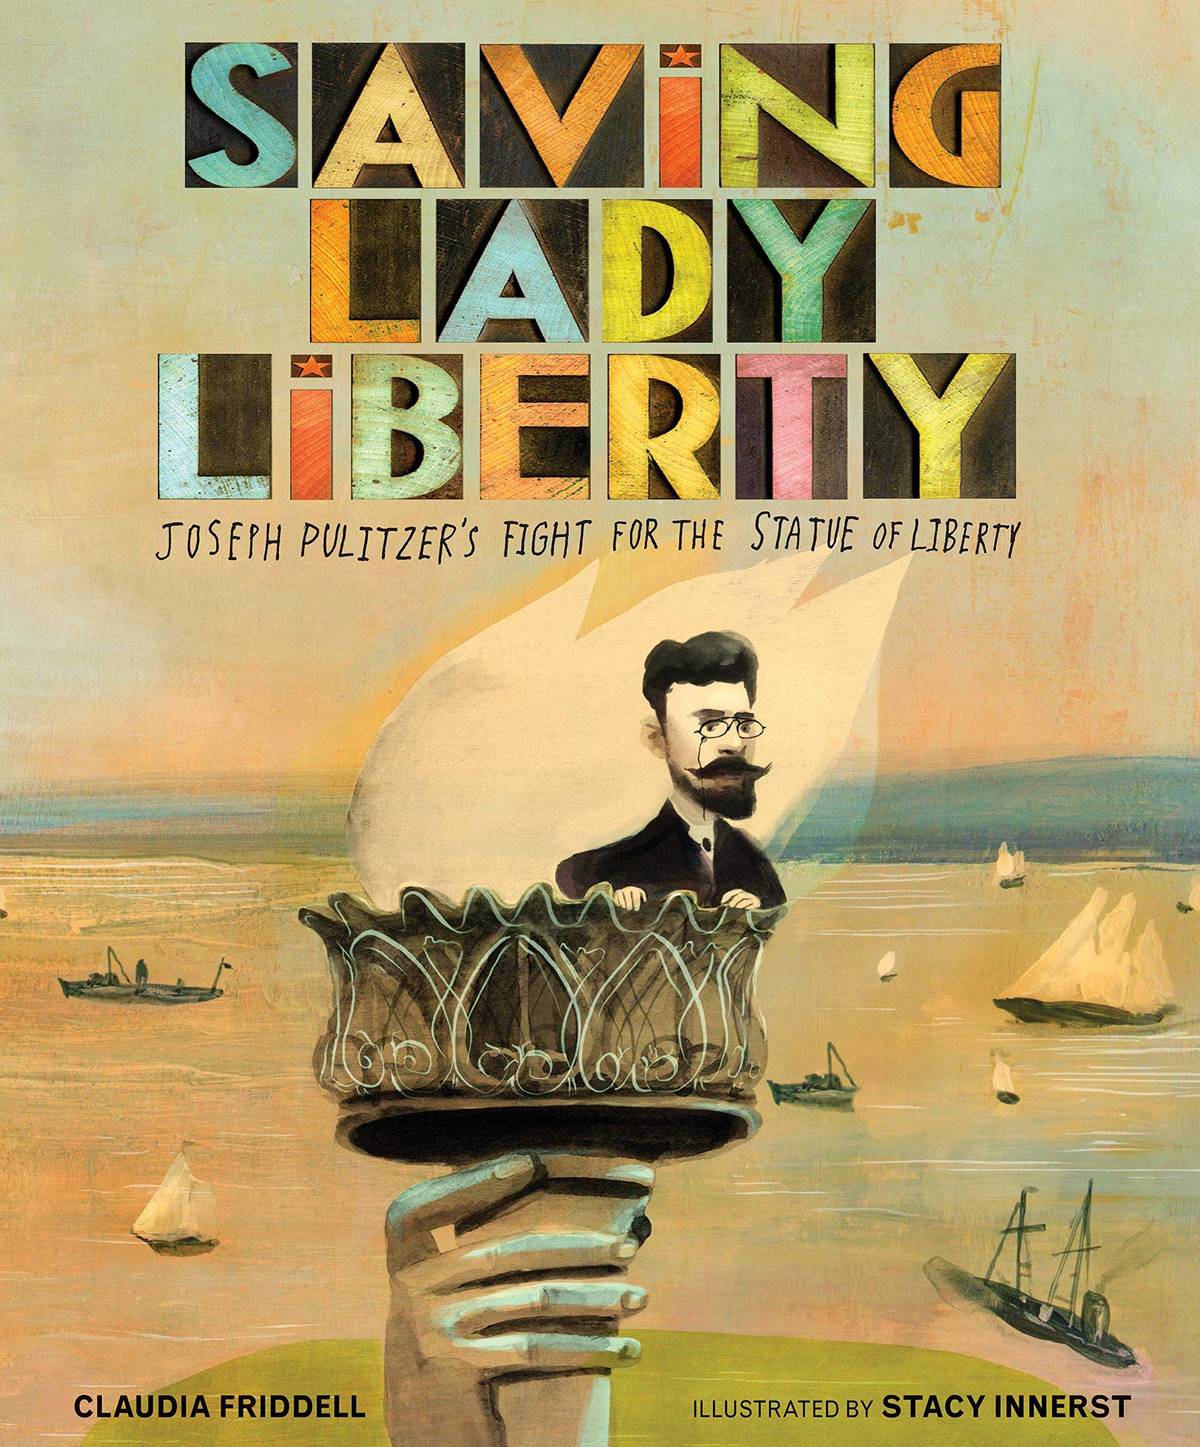 ‘Saving Lady Liberty’ by Gloria Fridell, illustrated by Stacy Innerst